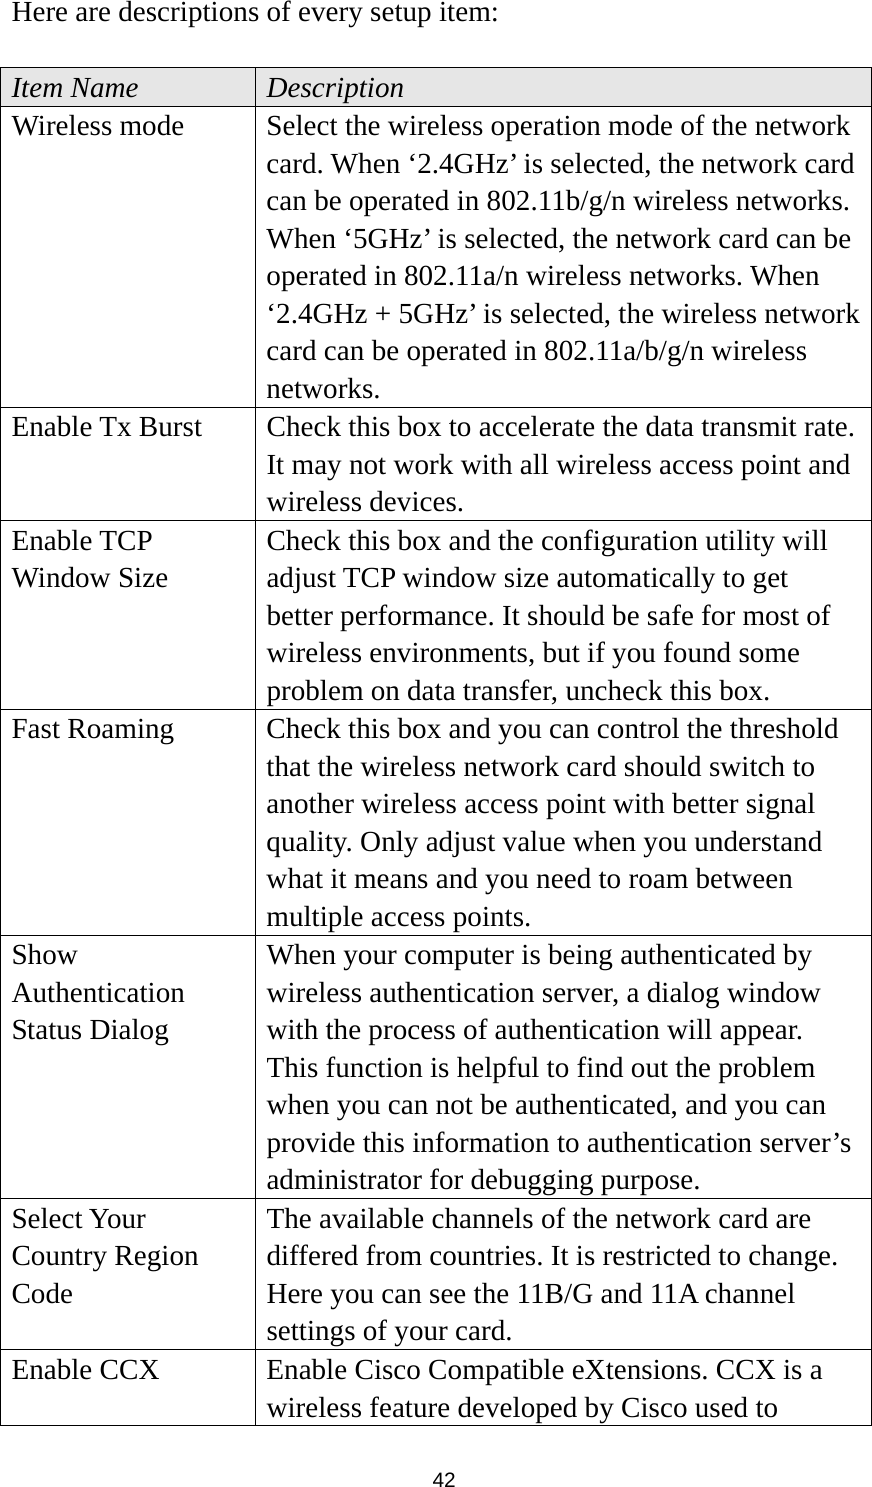  42 Here are descriptions of every setup item:  Item Name  Description Wireless mode  Select the wireless operation mode of the network card. When ‘2.4GHz’ is selected, the network card can be operated in 802.11b/g/n wireless networks. When ‘5GHz’ is selected, the network card can be operated in 802.11a/n wireless networks. When ‘2.4GHz + 5GHz’ is selected, the wireless network card can be operated in 802.11a/b/g/n wireless networks. Enable Tx Burst  Check this box to accelerate the data transmit rate. It may not work with all wireless access point and wireless devices. Enable TCP Window Size Check this box and the configuration utility will adjust TCP window size automatically to get better performance. It should be safe for most of wireless environments, but if you found some problem on data transfer, uncheck this box. Fast Roaming  Check this box and you can control the threshold that the wireless network card should switch to another wireless access point with better signal quality. Only adjust value when you understand what it means and you need to roam between multiple access points. Show Authentication Status Dialog When your computer is being authenticated by wireless authentication server, a dialog window with the process of authentication will appear. This function is helpful to find out the problem when you can not be authenticated, and you can provide this information to authentication server’s administrator for debugging purpose. Select Your Country Region Code The available channels of the network card are differed from countries. It is restricted to change. Here you can see the 11B/G and 11A channel settings of your card. Enable CCX  Enable Cisco Compatible eXtensions. CCX is a wireless feature developed by Cisco used to 